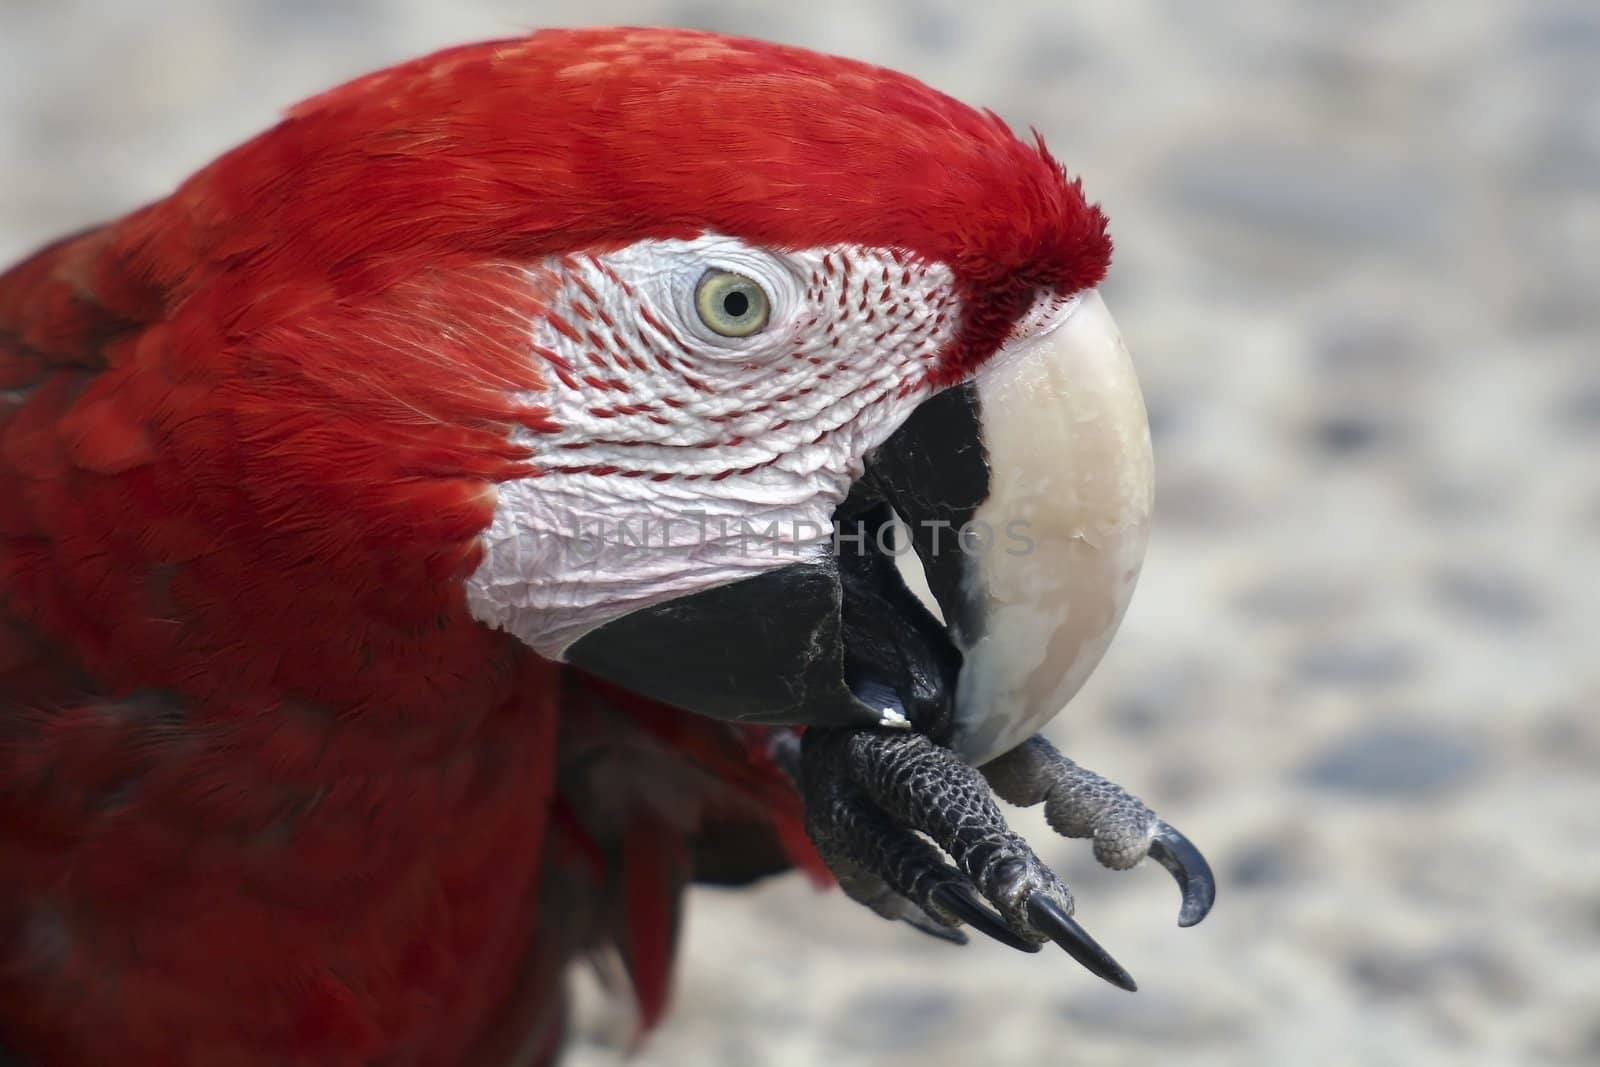 Red Macaw by monner